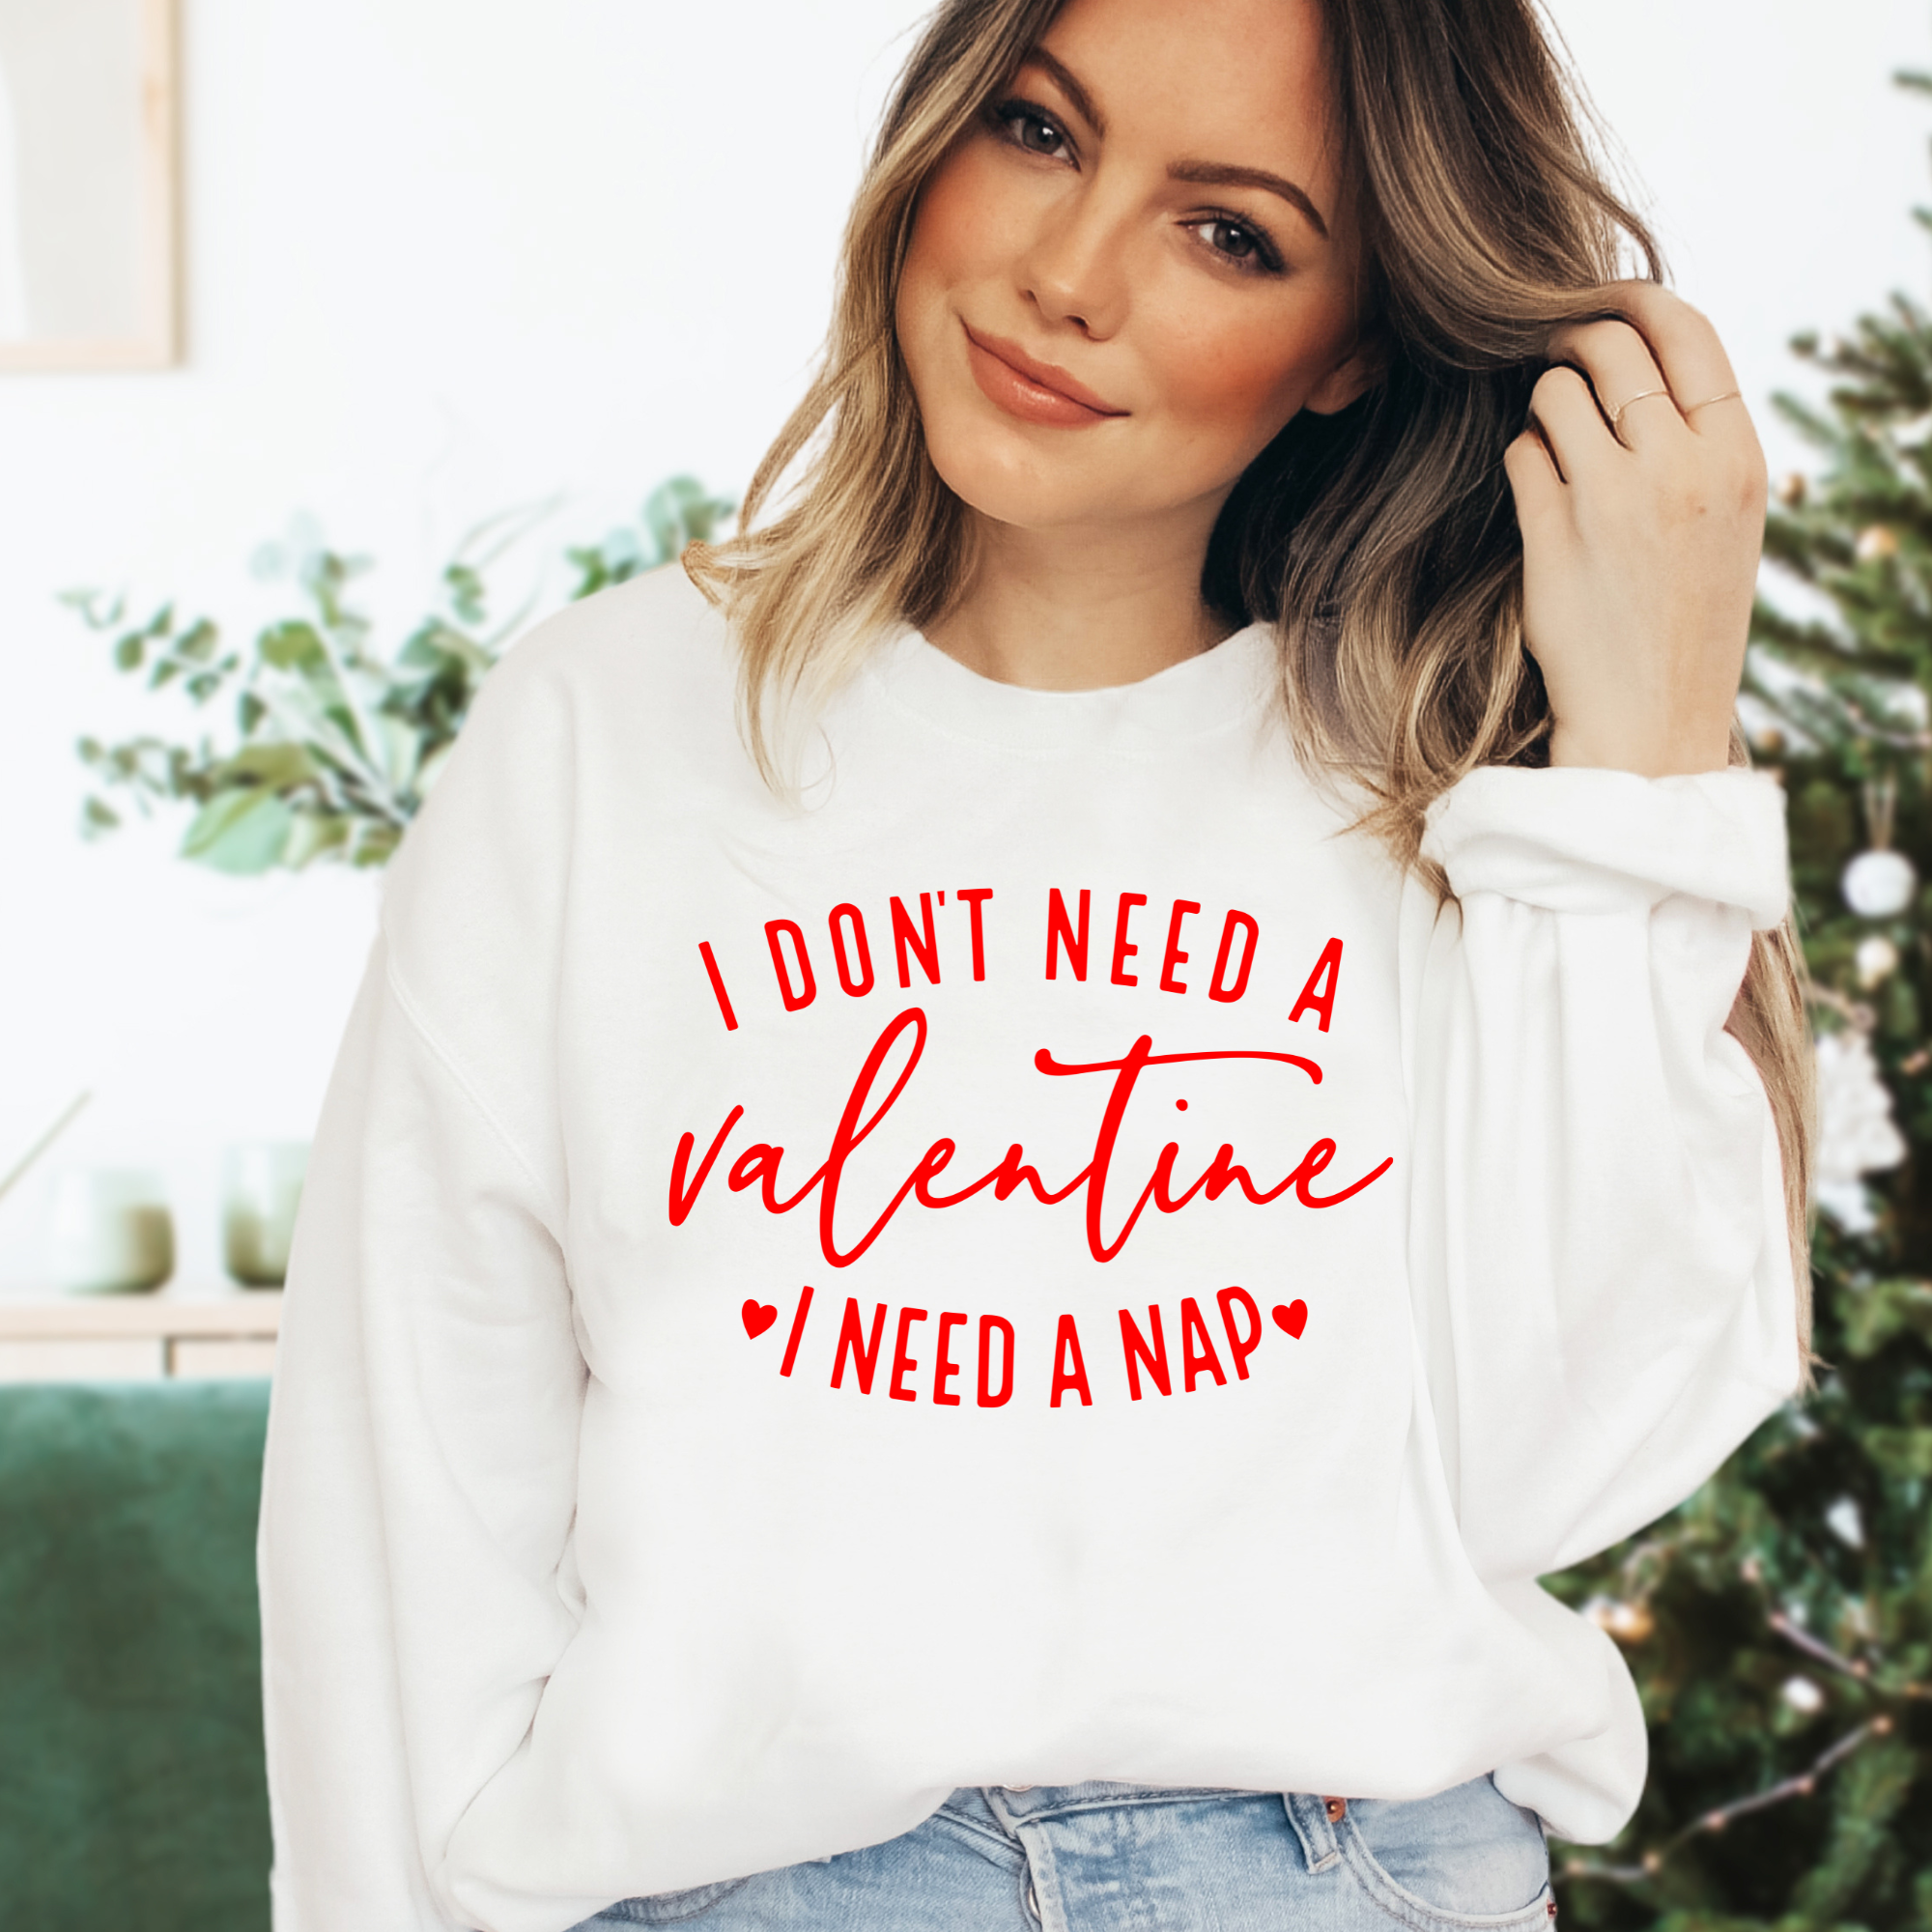 I Don't Need a Valentines, I Need a Nap | Women's Graphic Tee